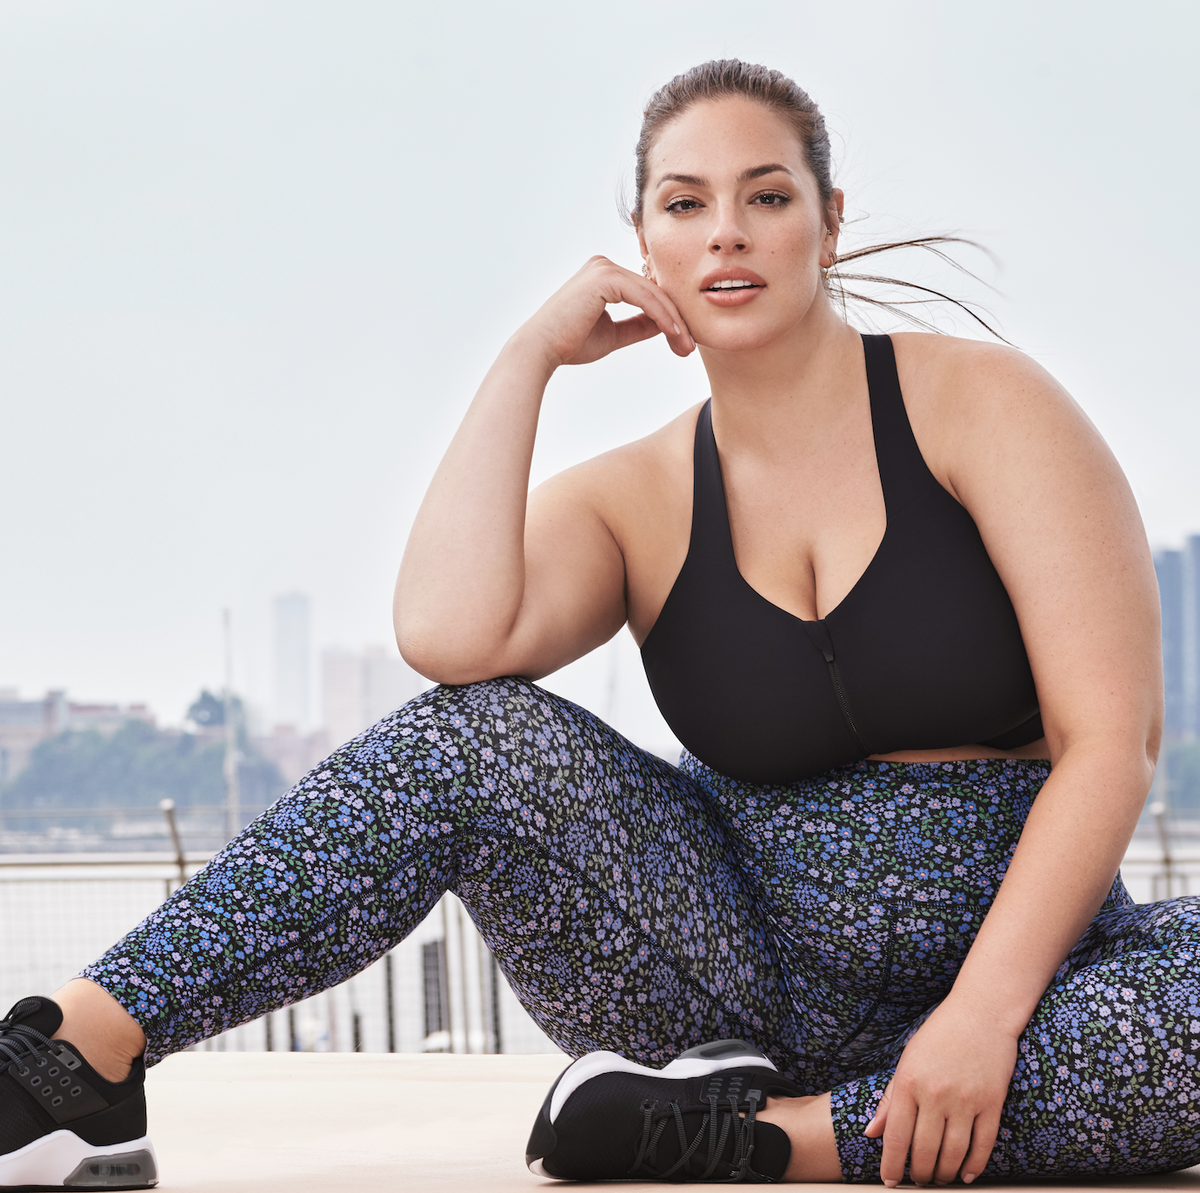 Plus-Sized Yogi is Changing the Face of Fitness on Instagram